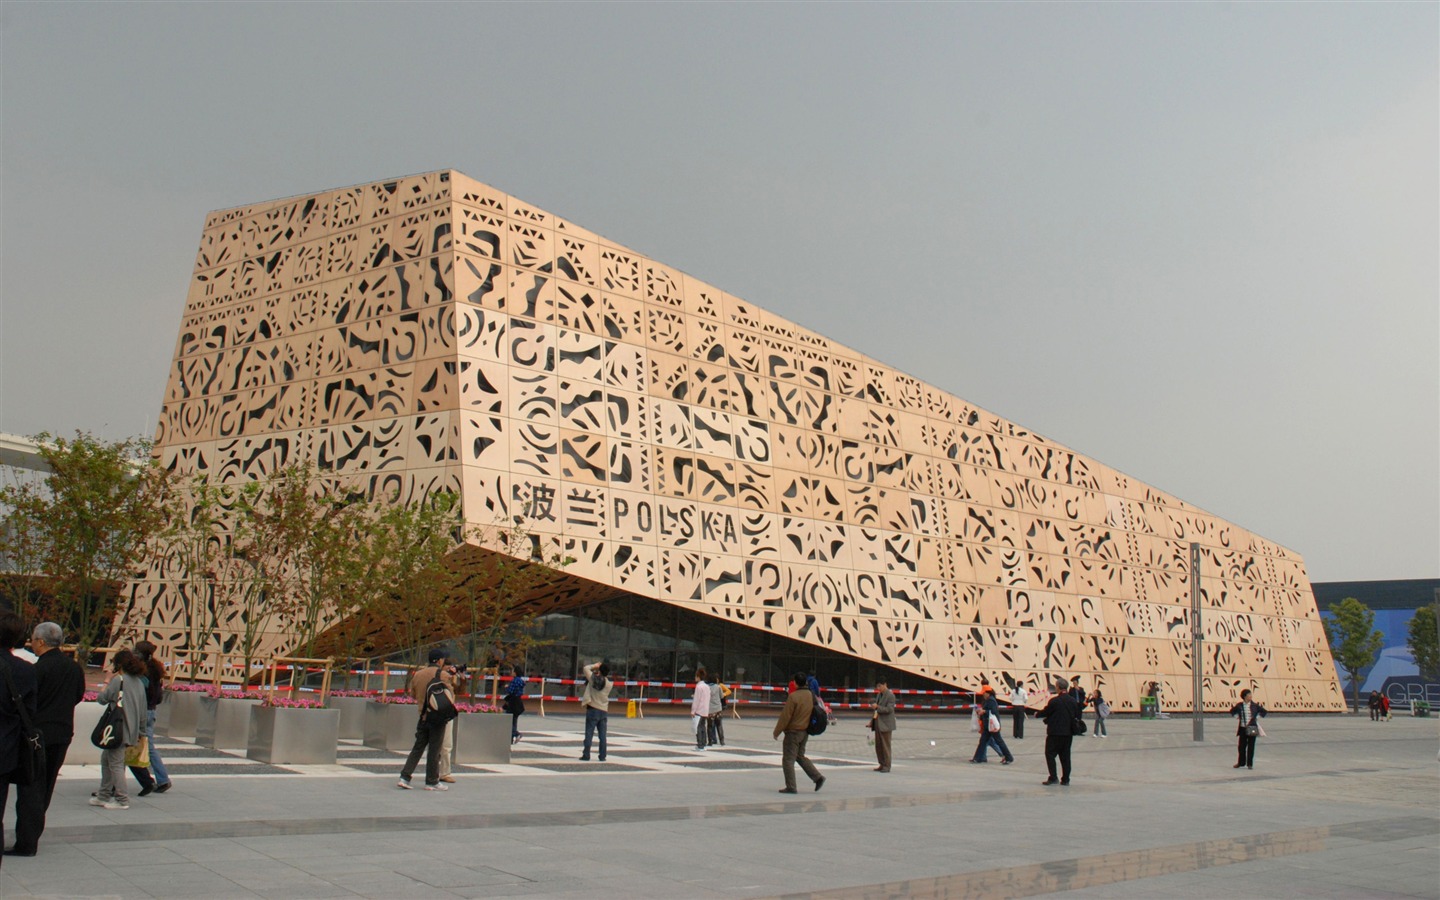 Commissioning of the 2010 Shanghai World Expo (studious works) #25 - 1440x900